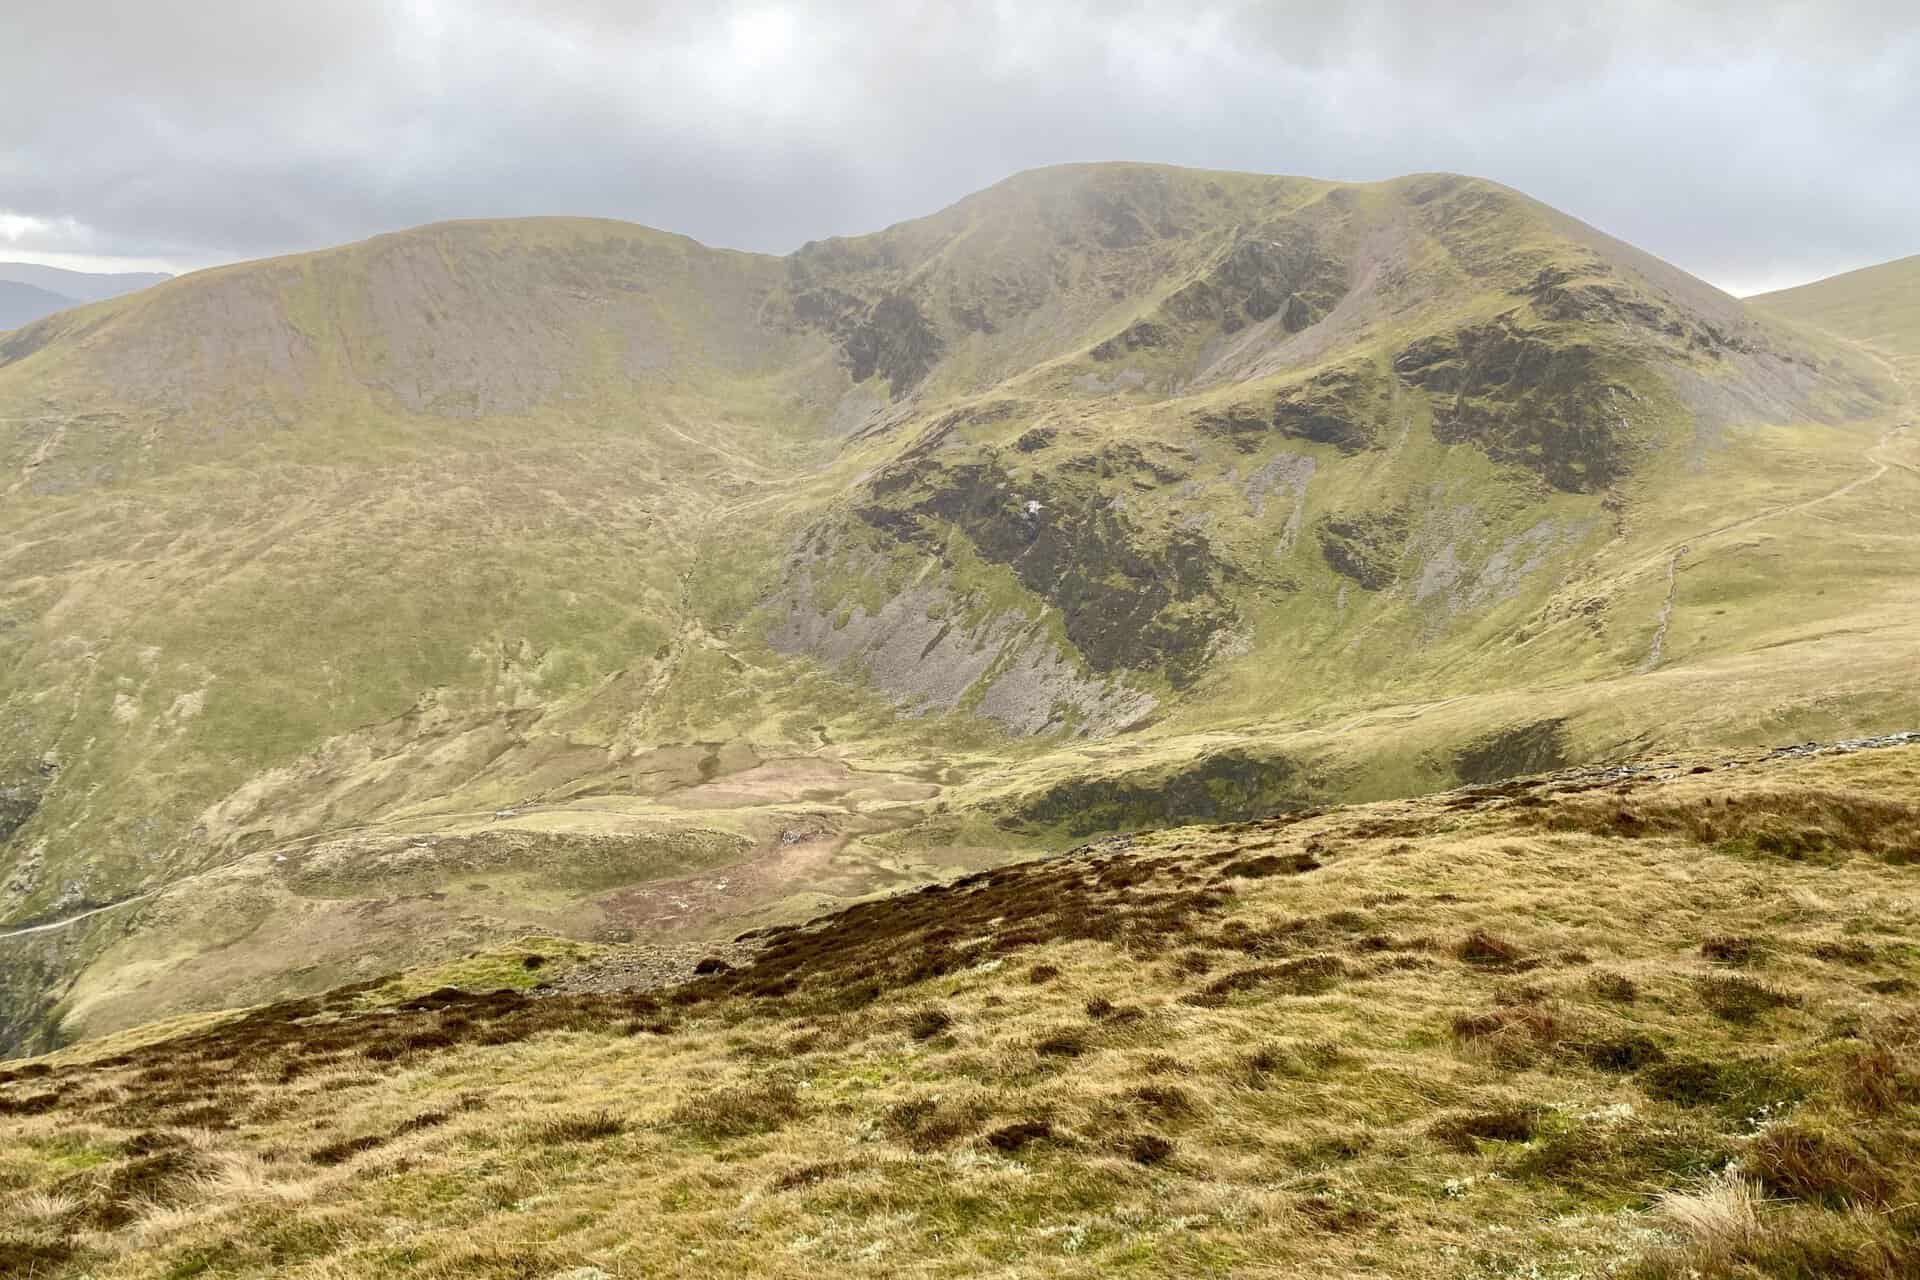 Crag Hill (right) and Sail (left).